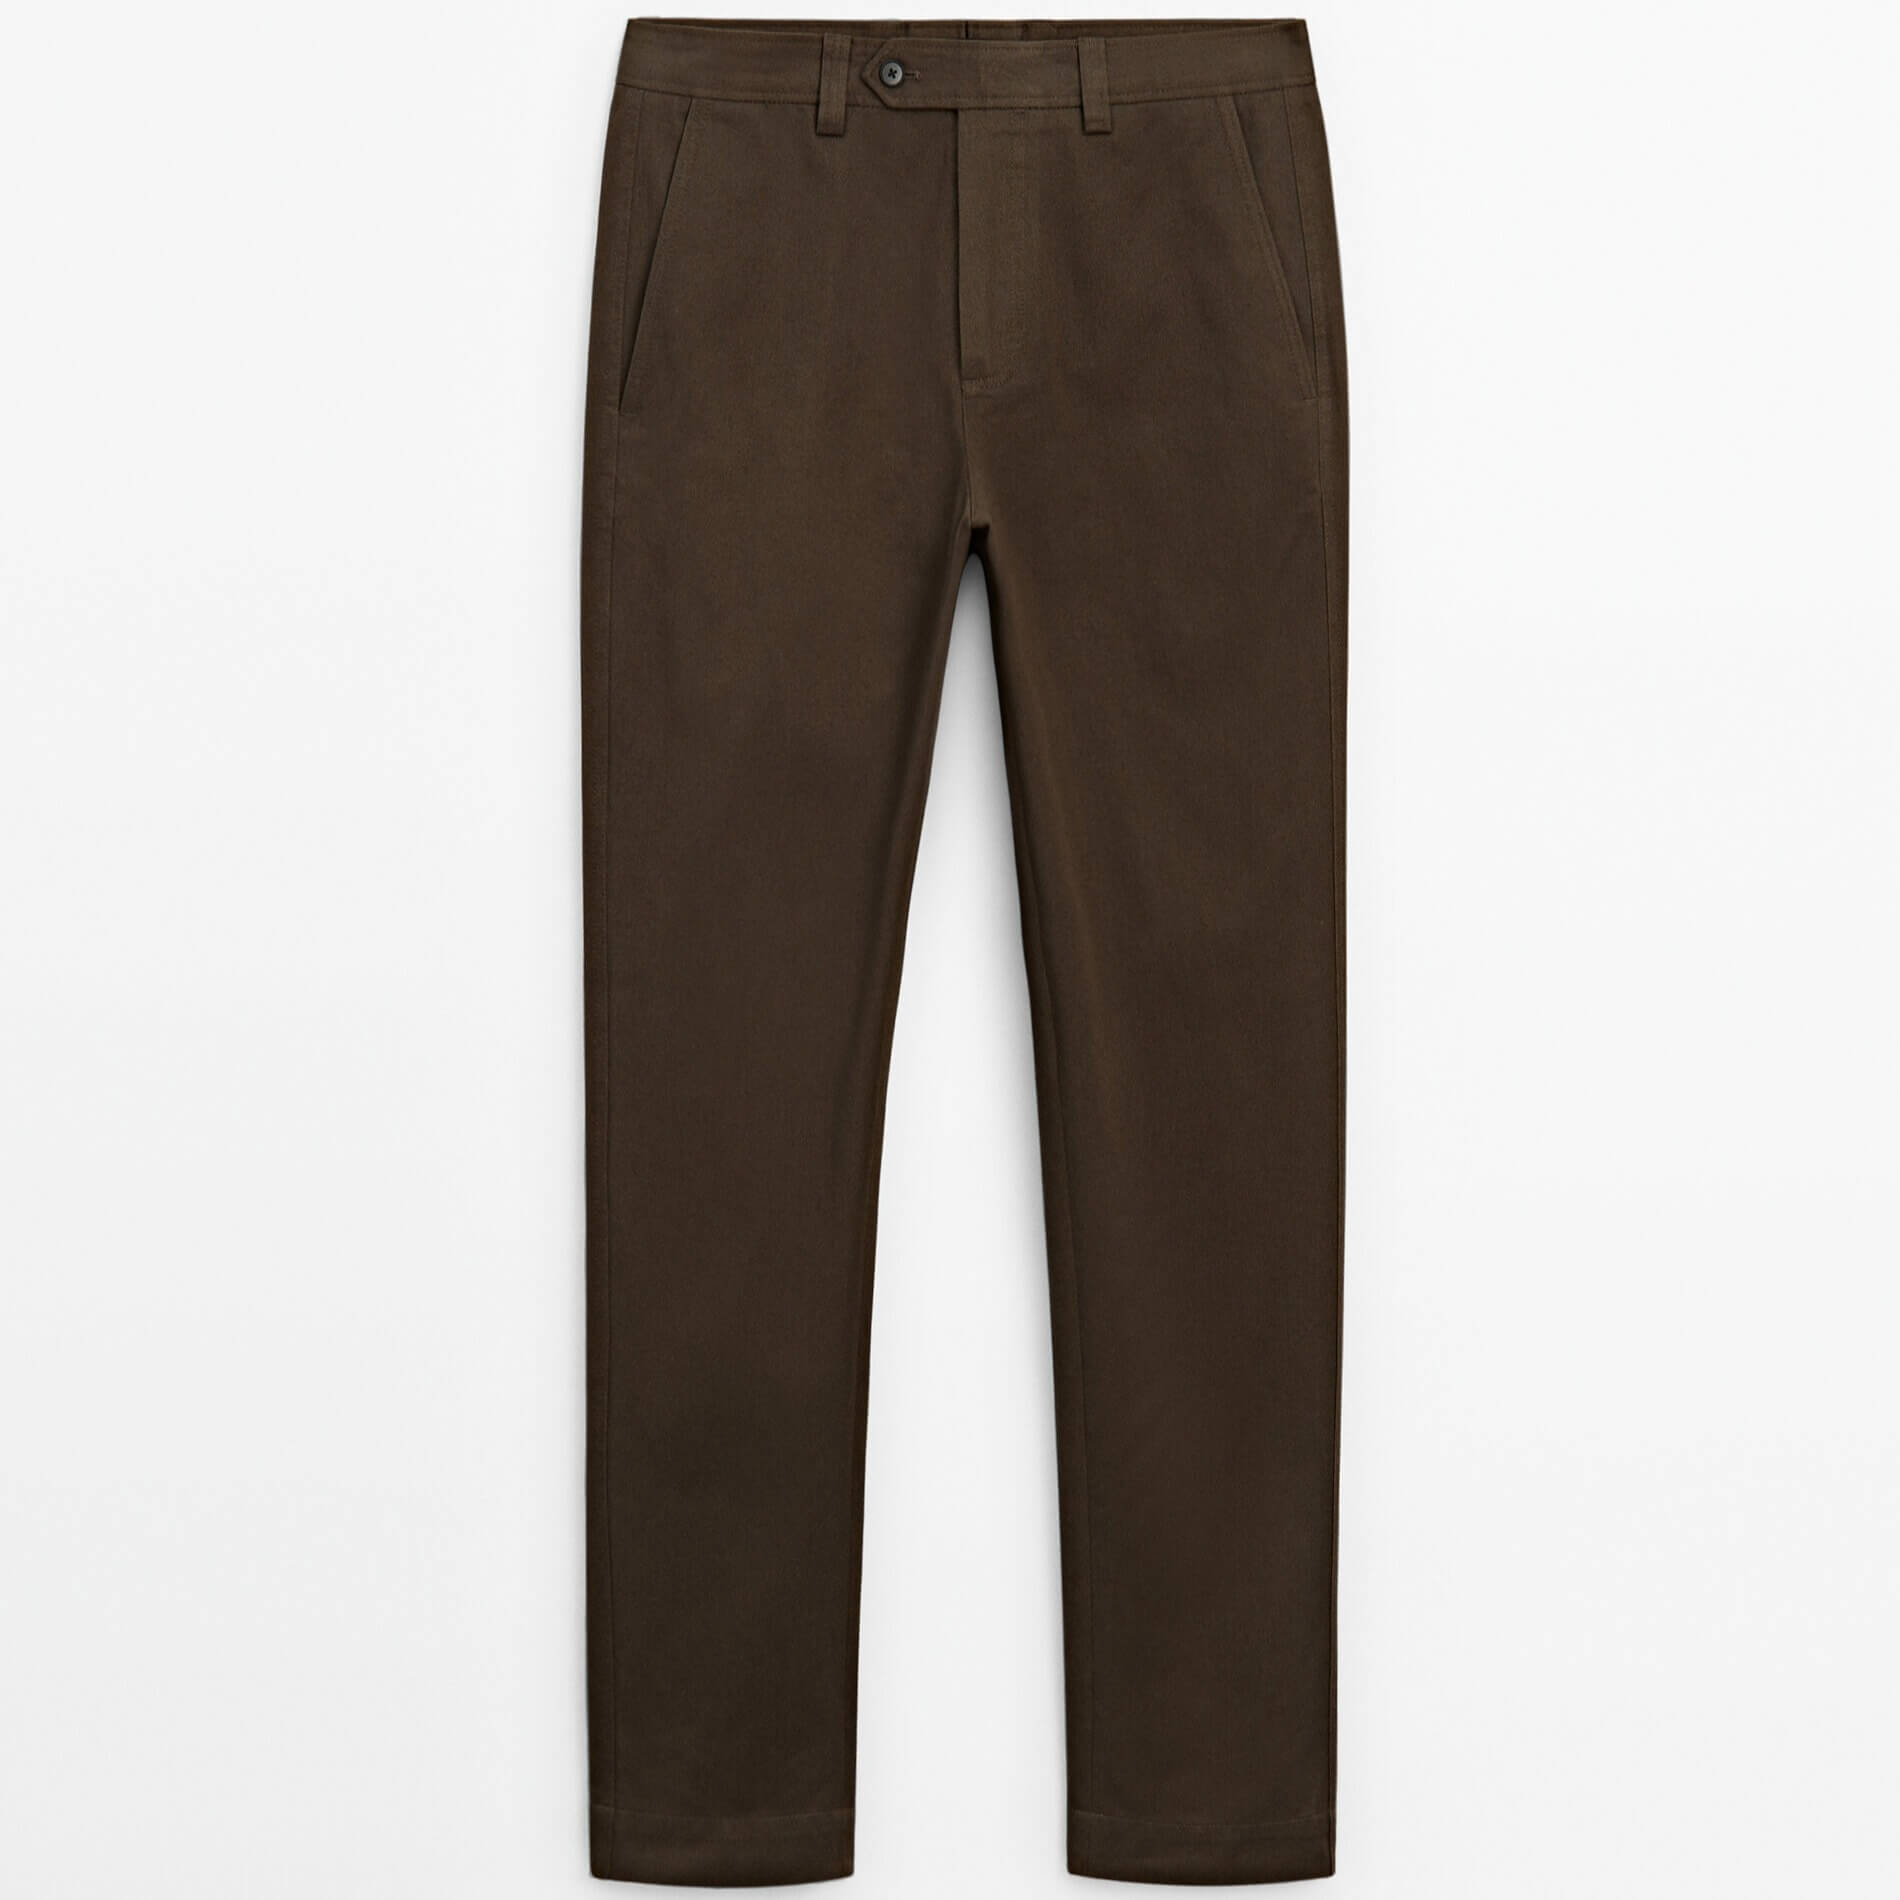 Брюки Massimo Dutti Relaxed Fit Belted Chino, коричневый фото